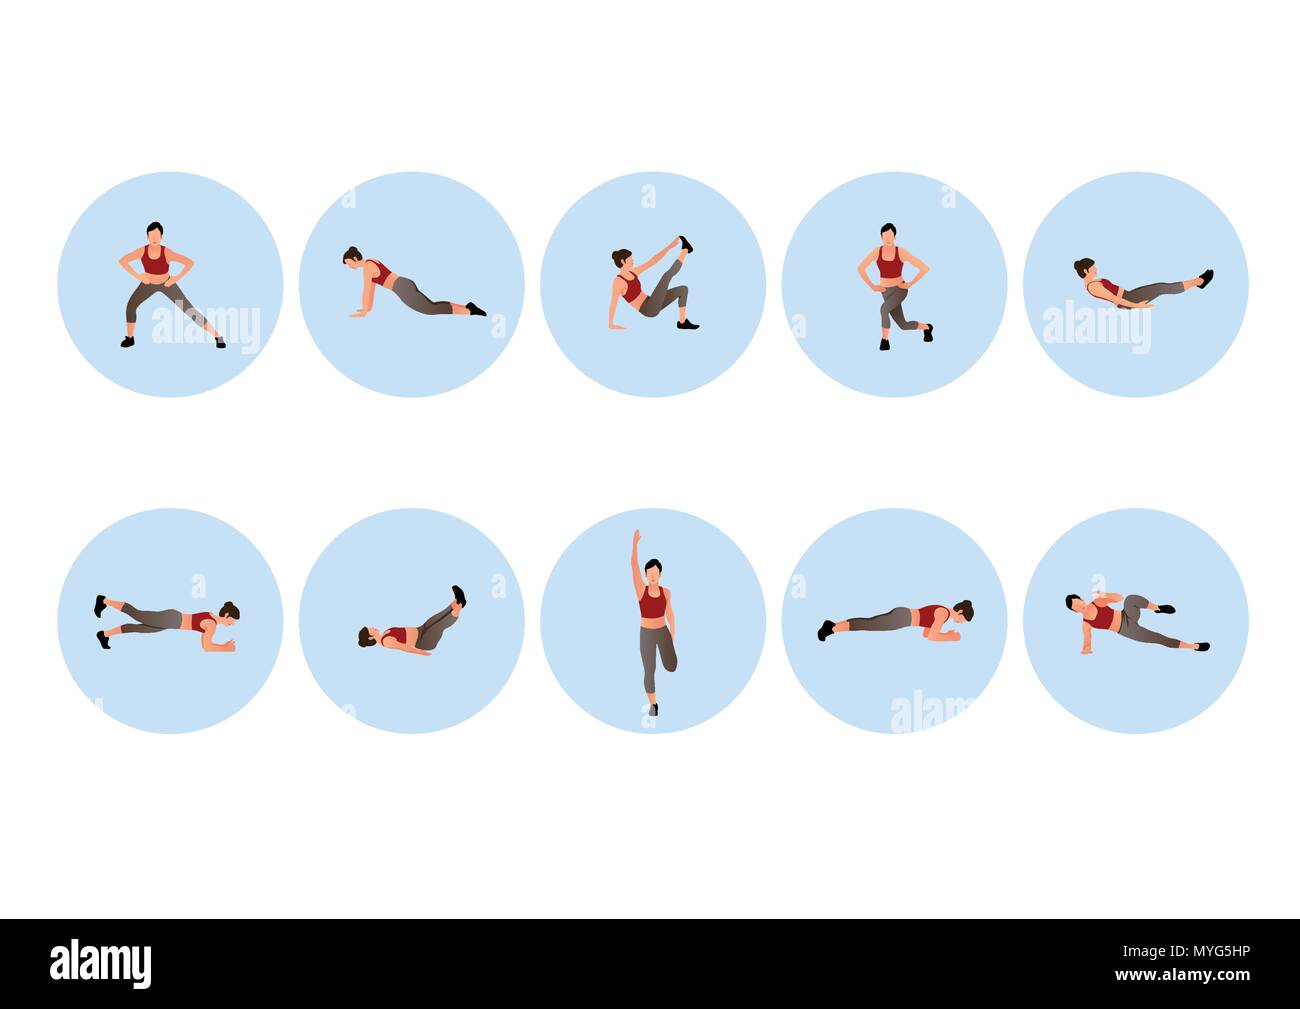 Training people icons set for sport and fitness. Flat style design vector illustration. 009 Stock Vector